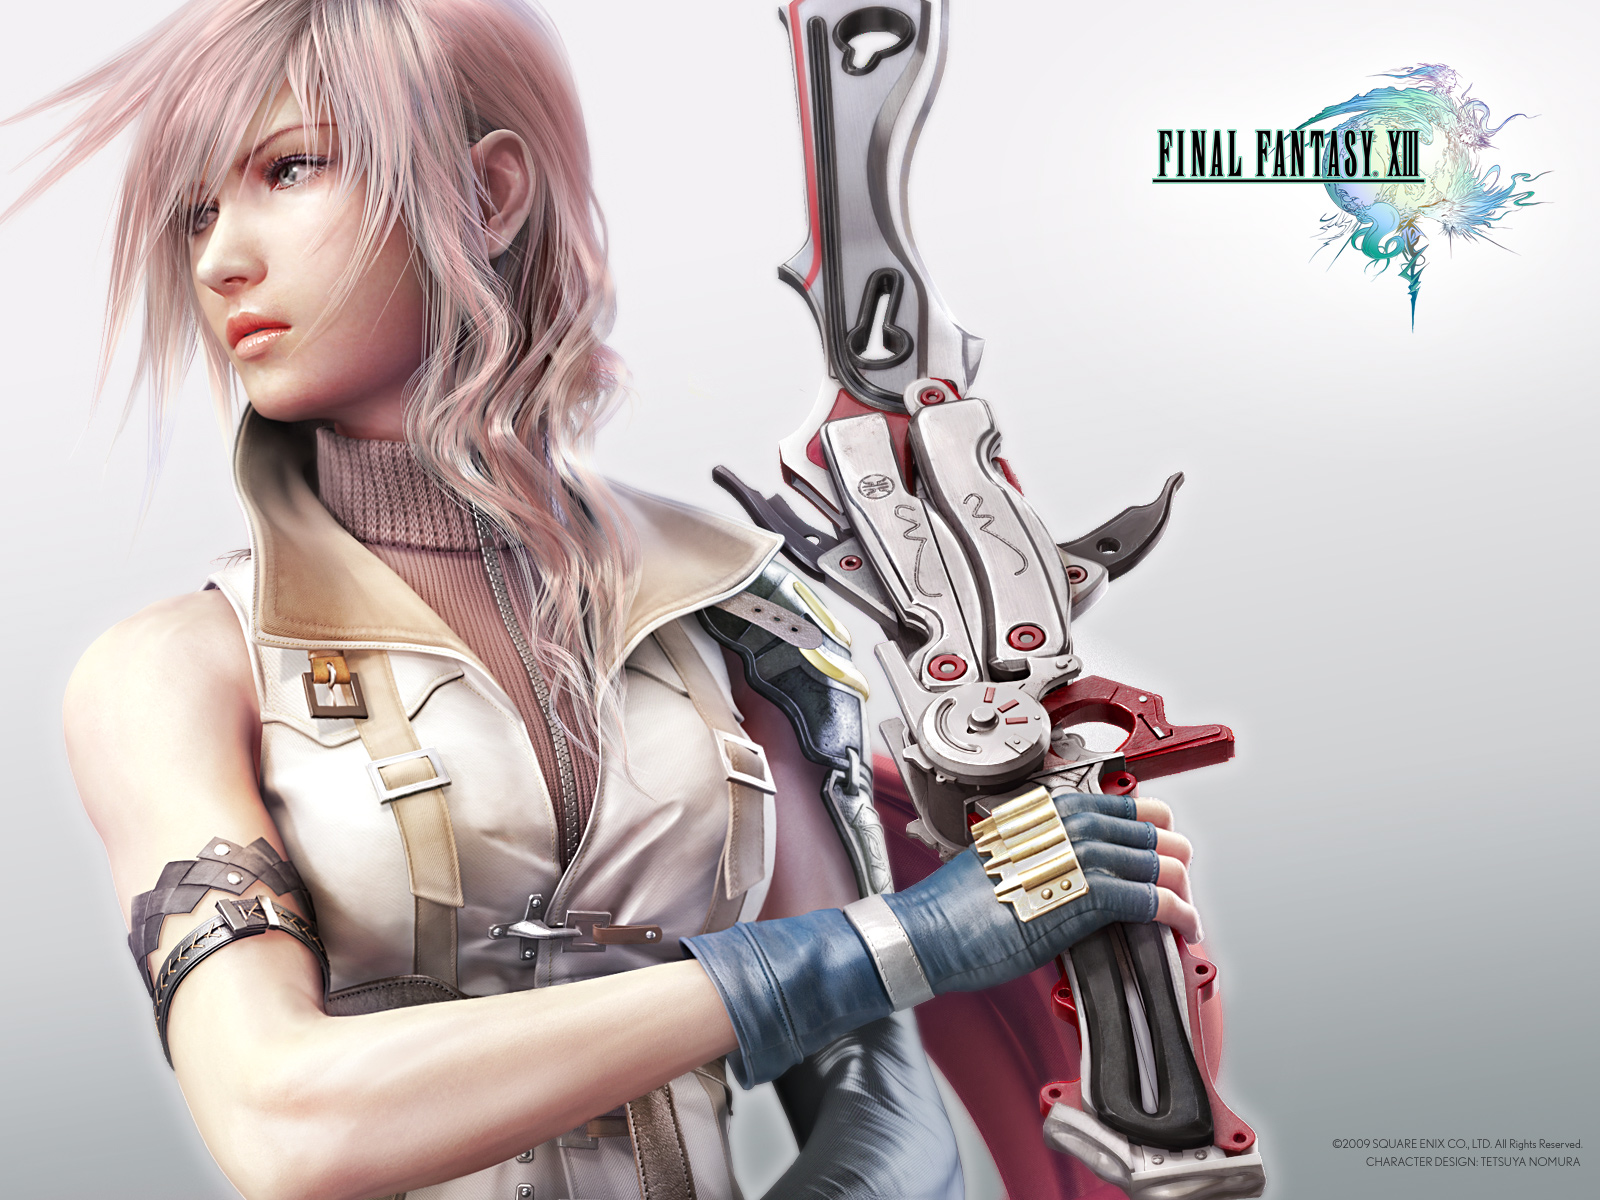 Final Fantasy Xiii Official Wallpapers Game Art Hq